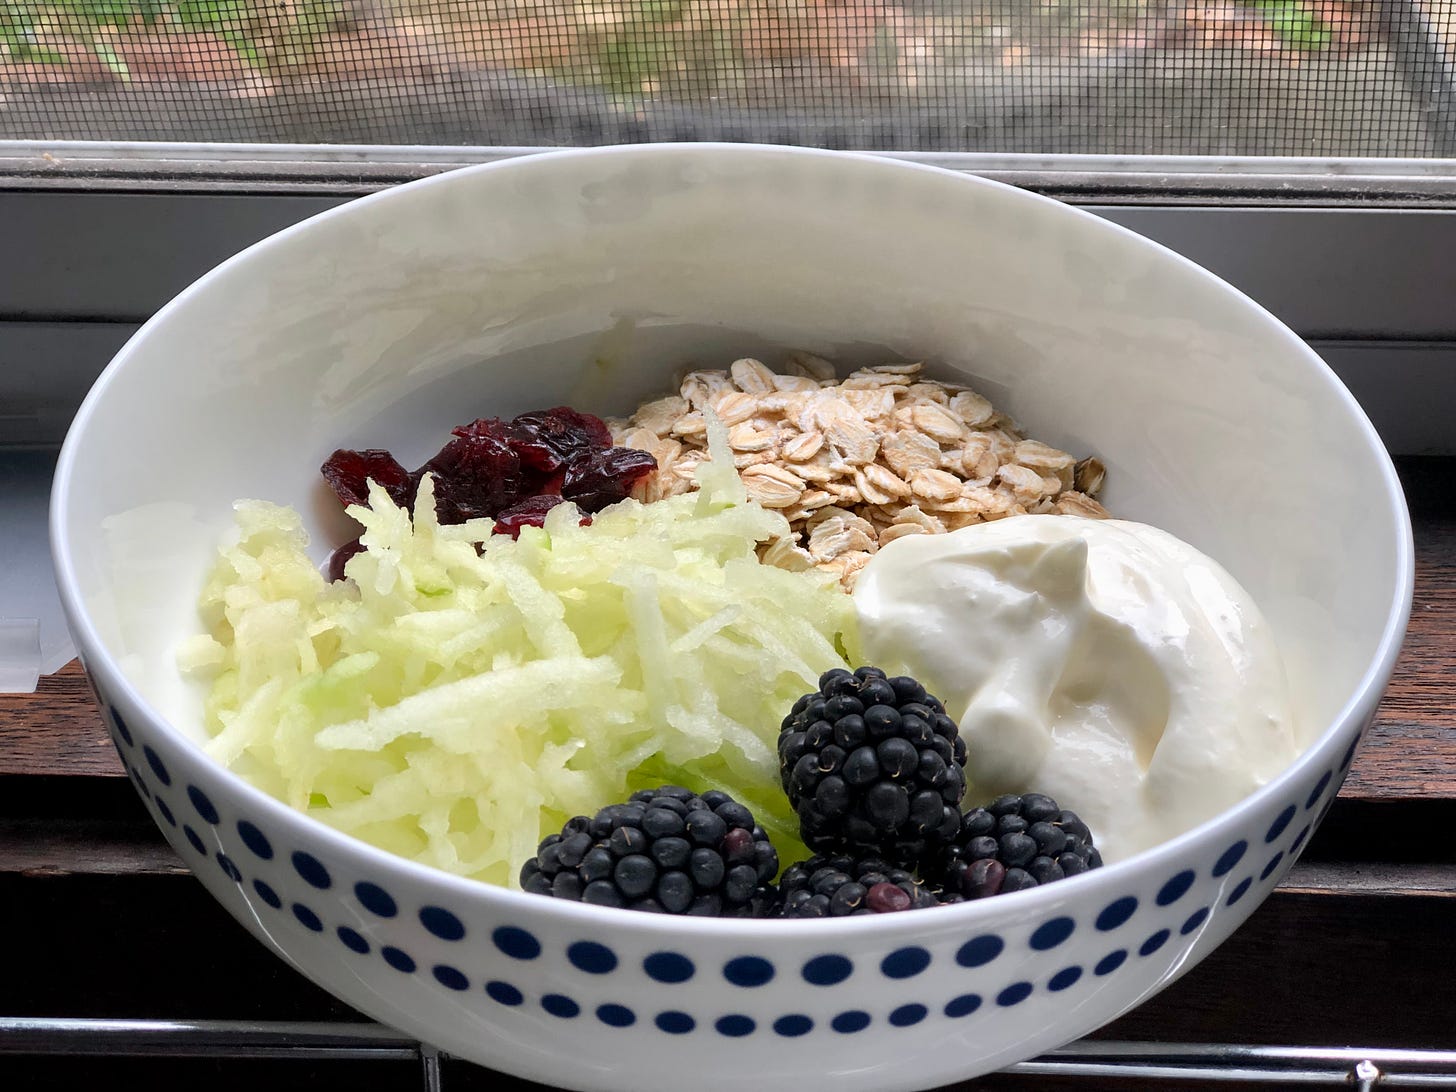 A breakfast bowl of oats, yoghurt, berries and grated apple